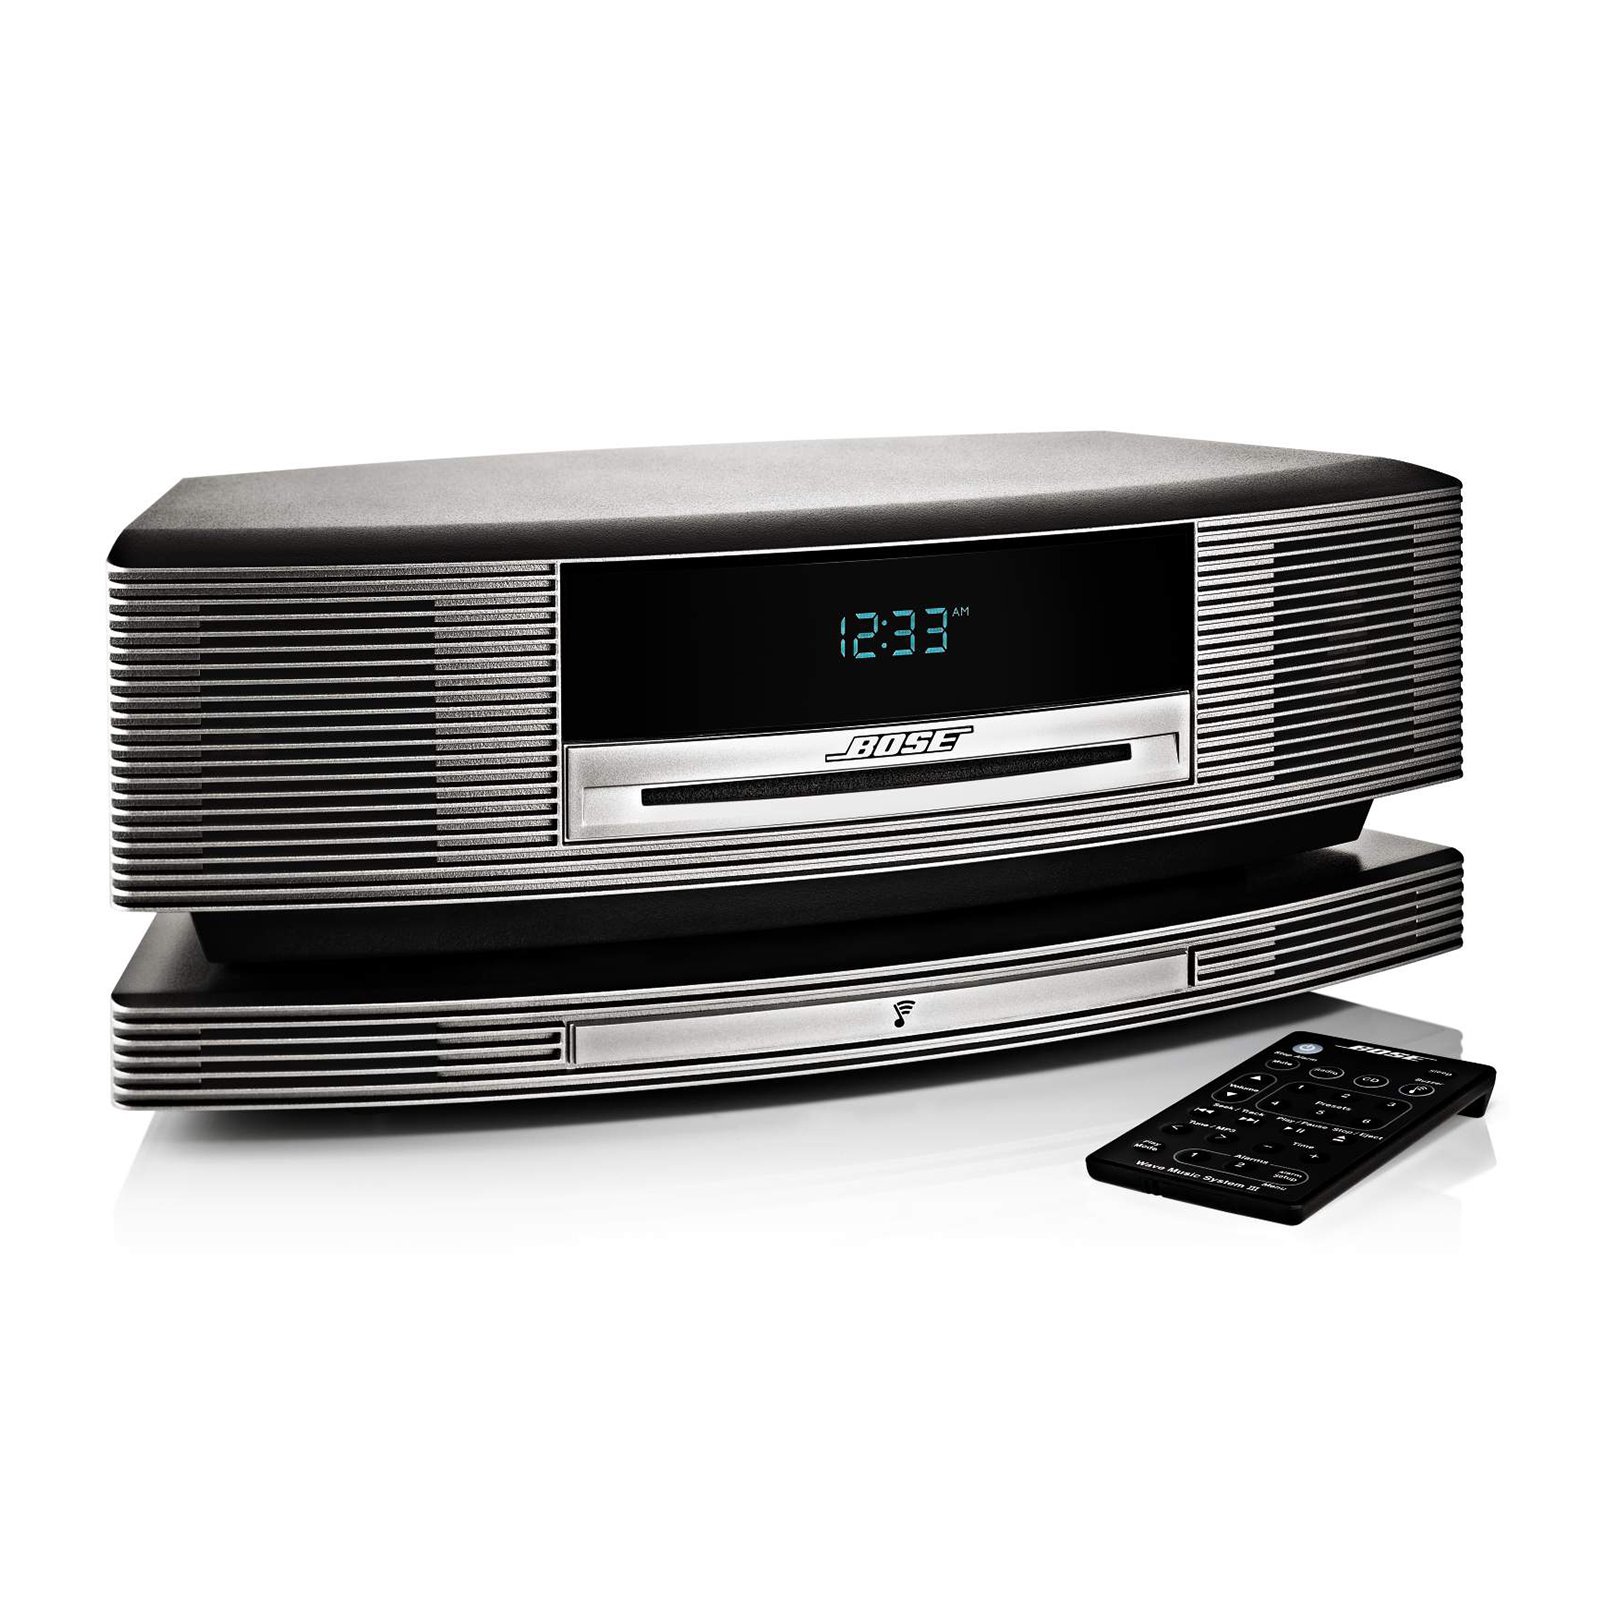 Wave® SoundTouch® music system